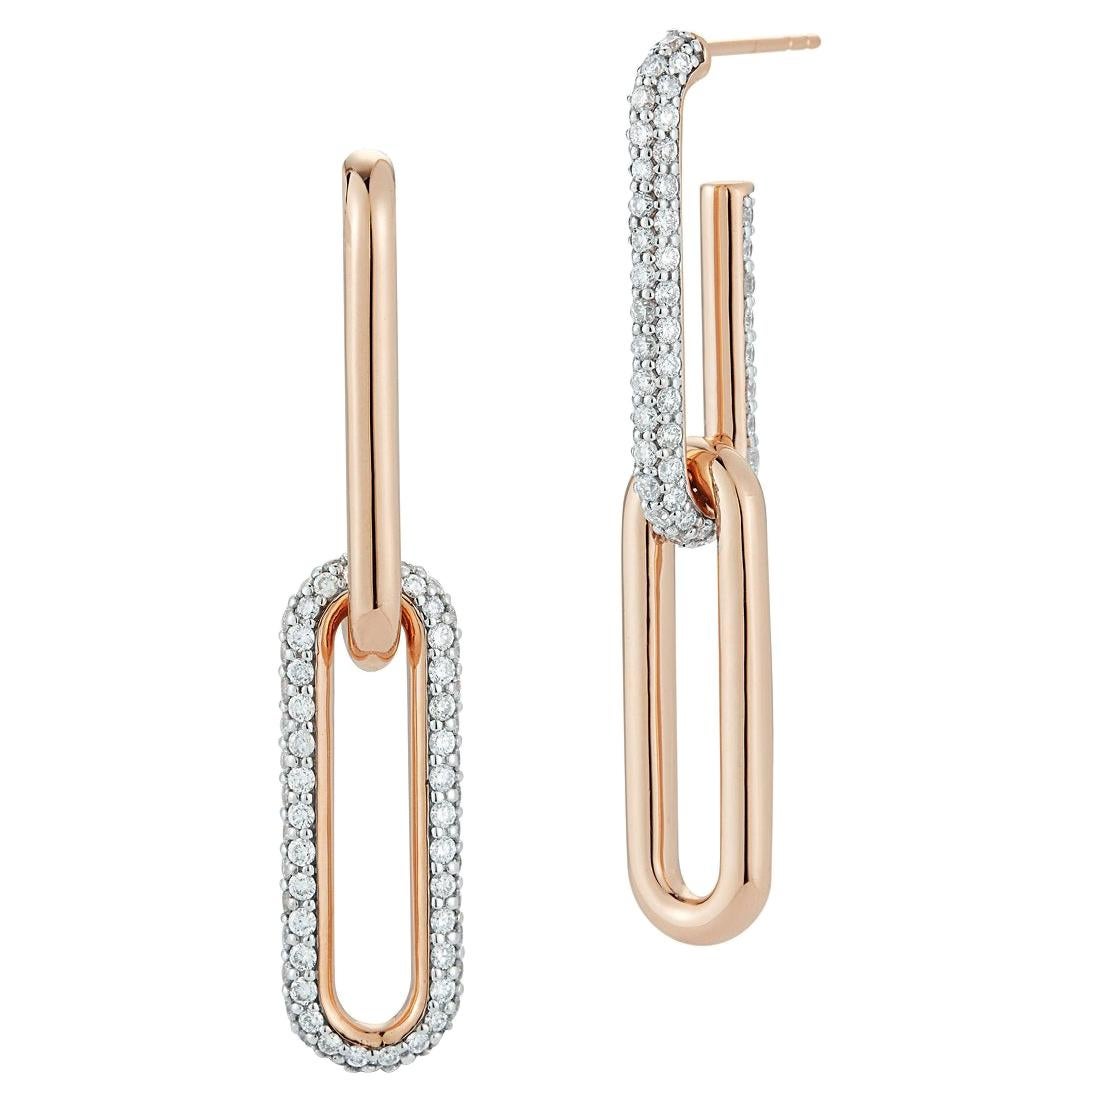 Walters Faith 18K Rose Gold and White Rhodium Diamond Mix Matched Link Earrings